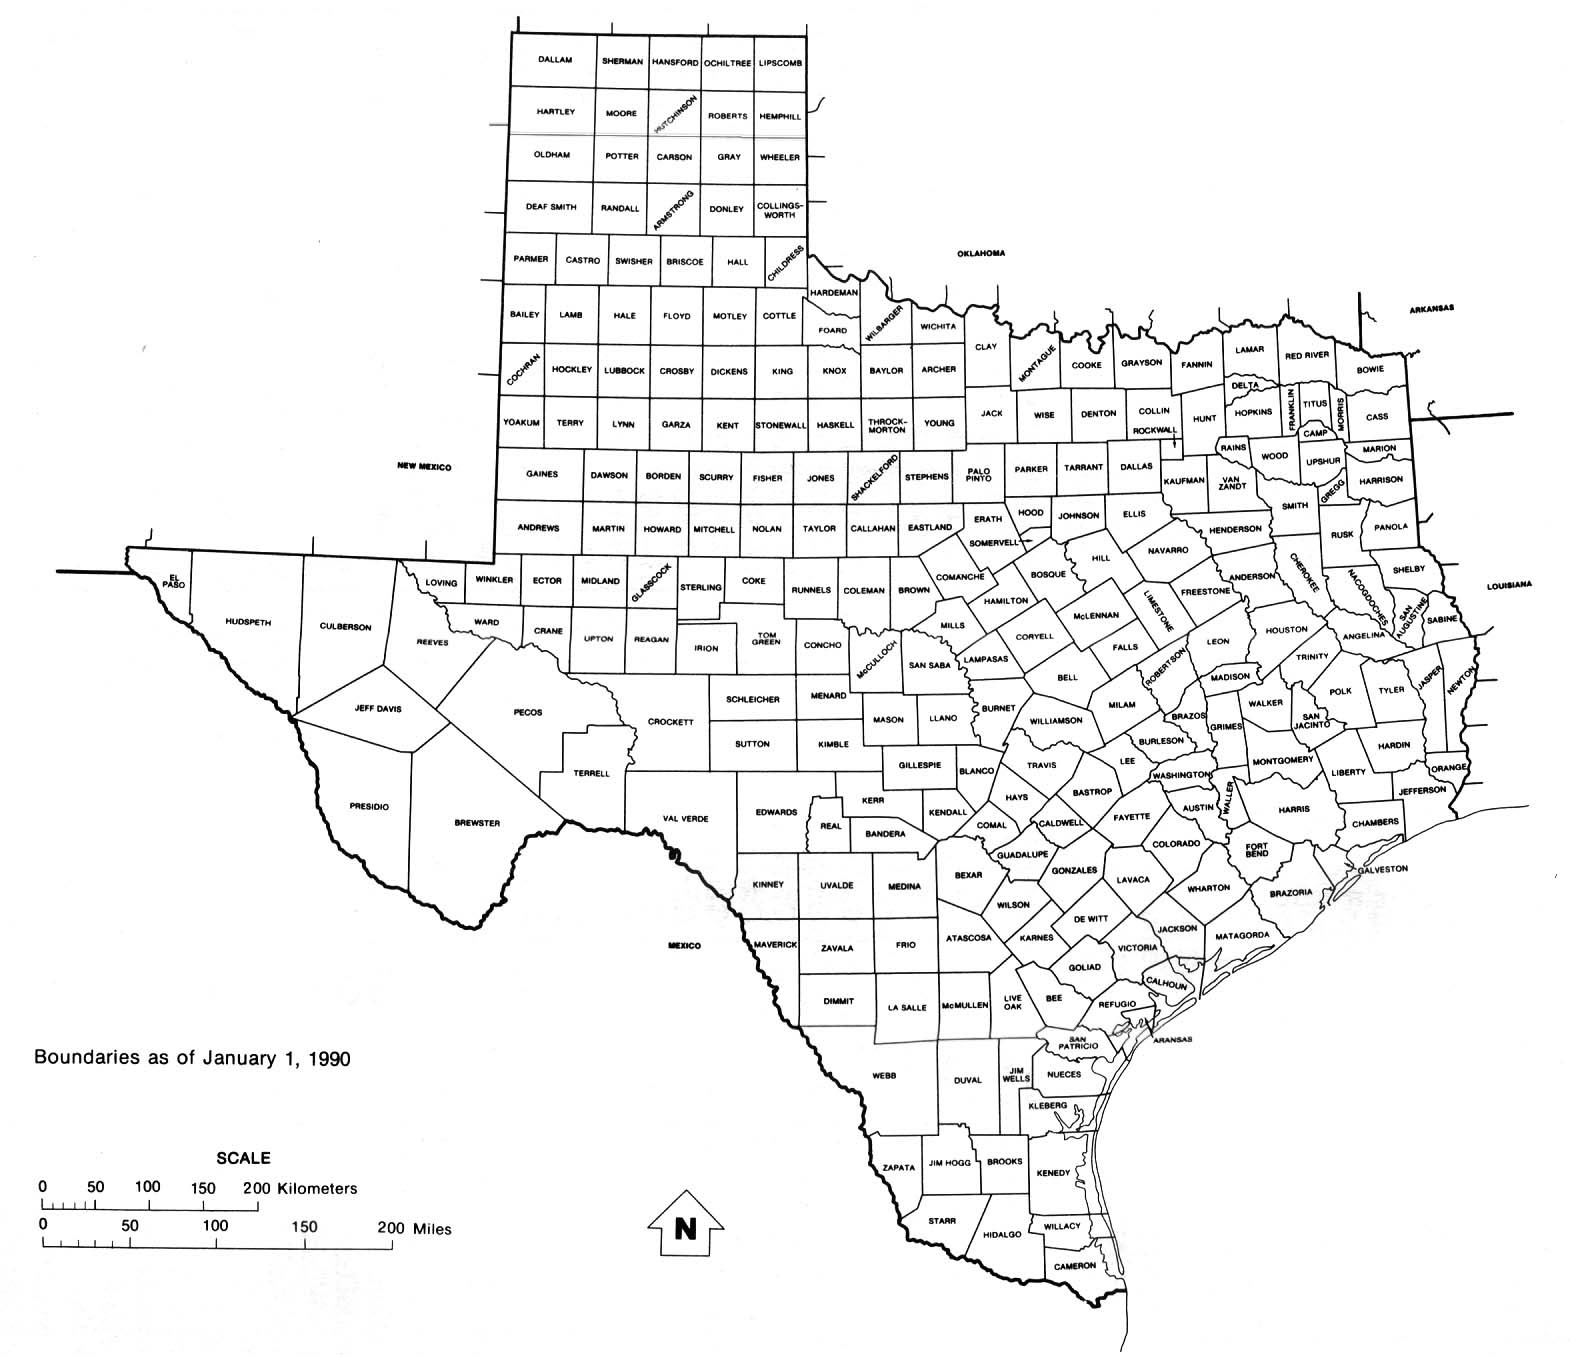 map of texas by county with names Business Ideas 2013 Maps Of Texas Counties map of texas by county with names